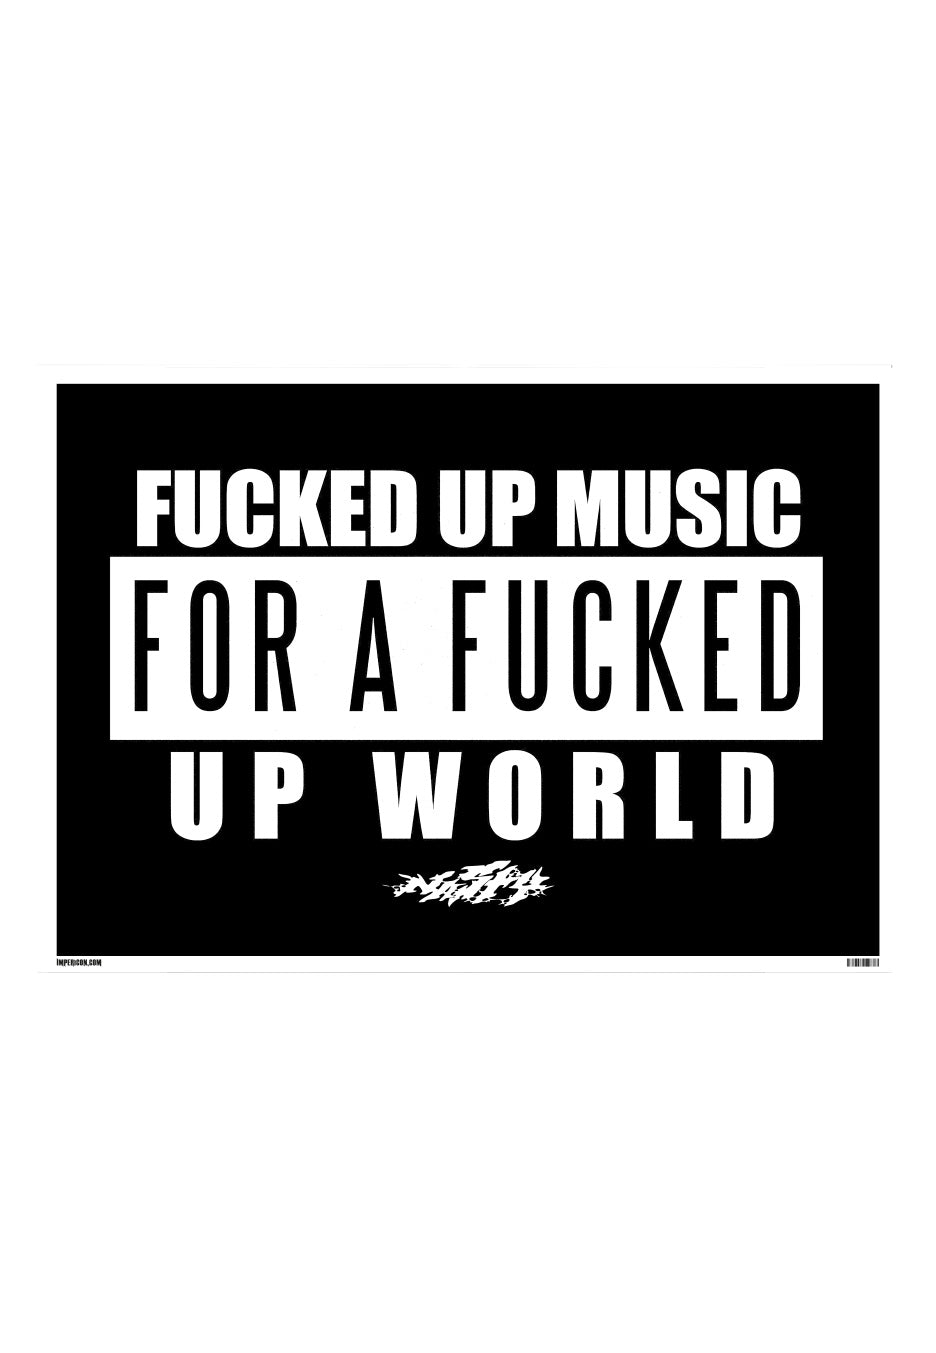 Nasty - Fucked Up Music - Poster